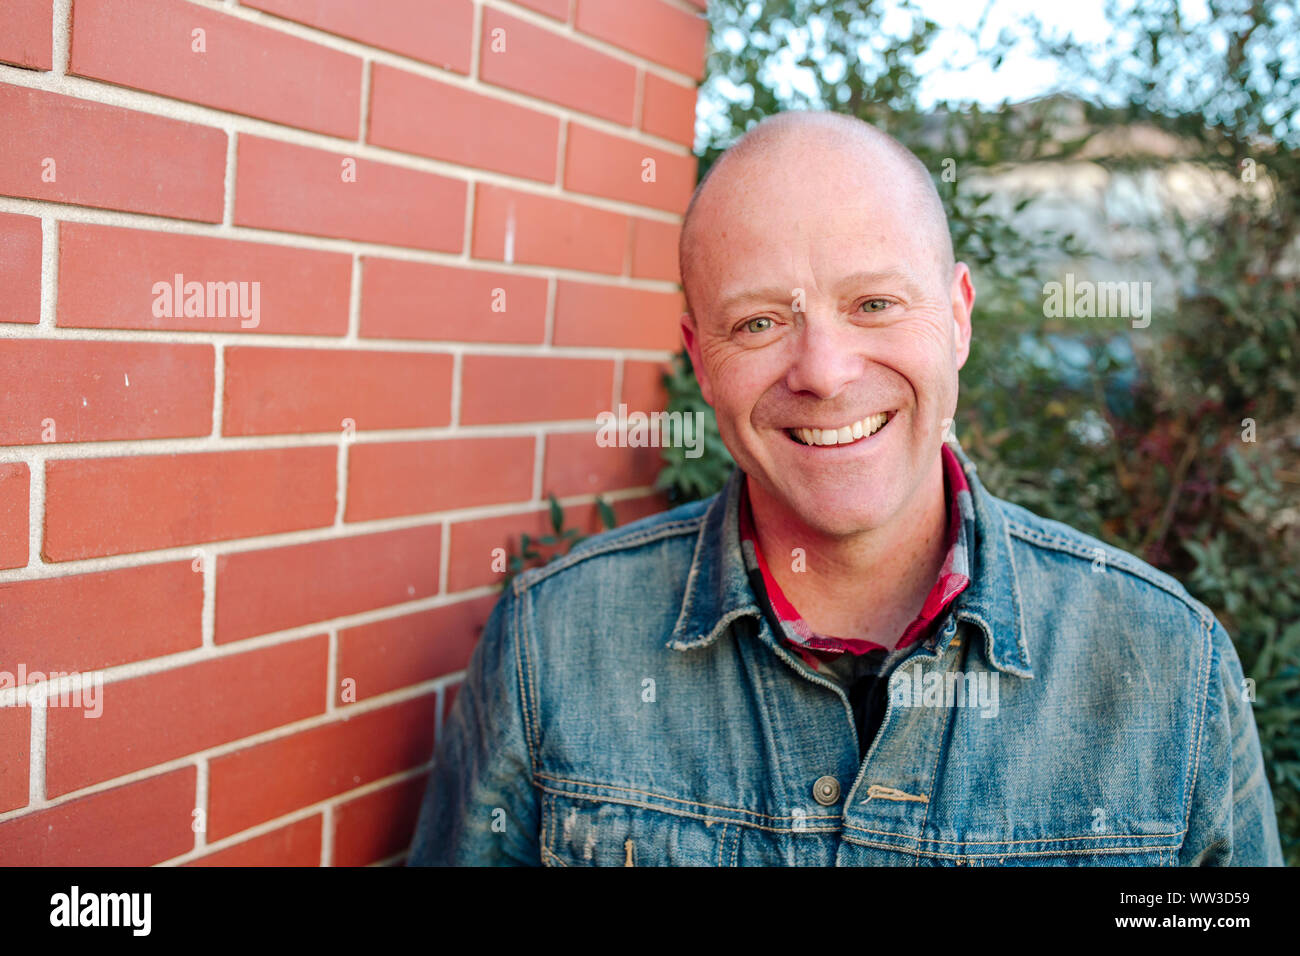 Portrait of smiling man in front of brick wall sunny day in California Stock Photo